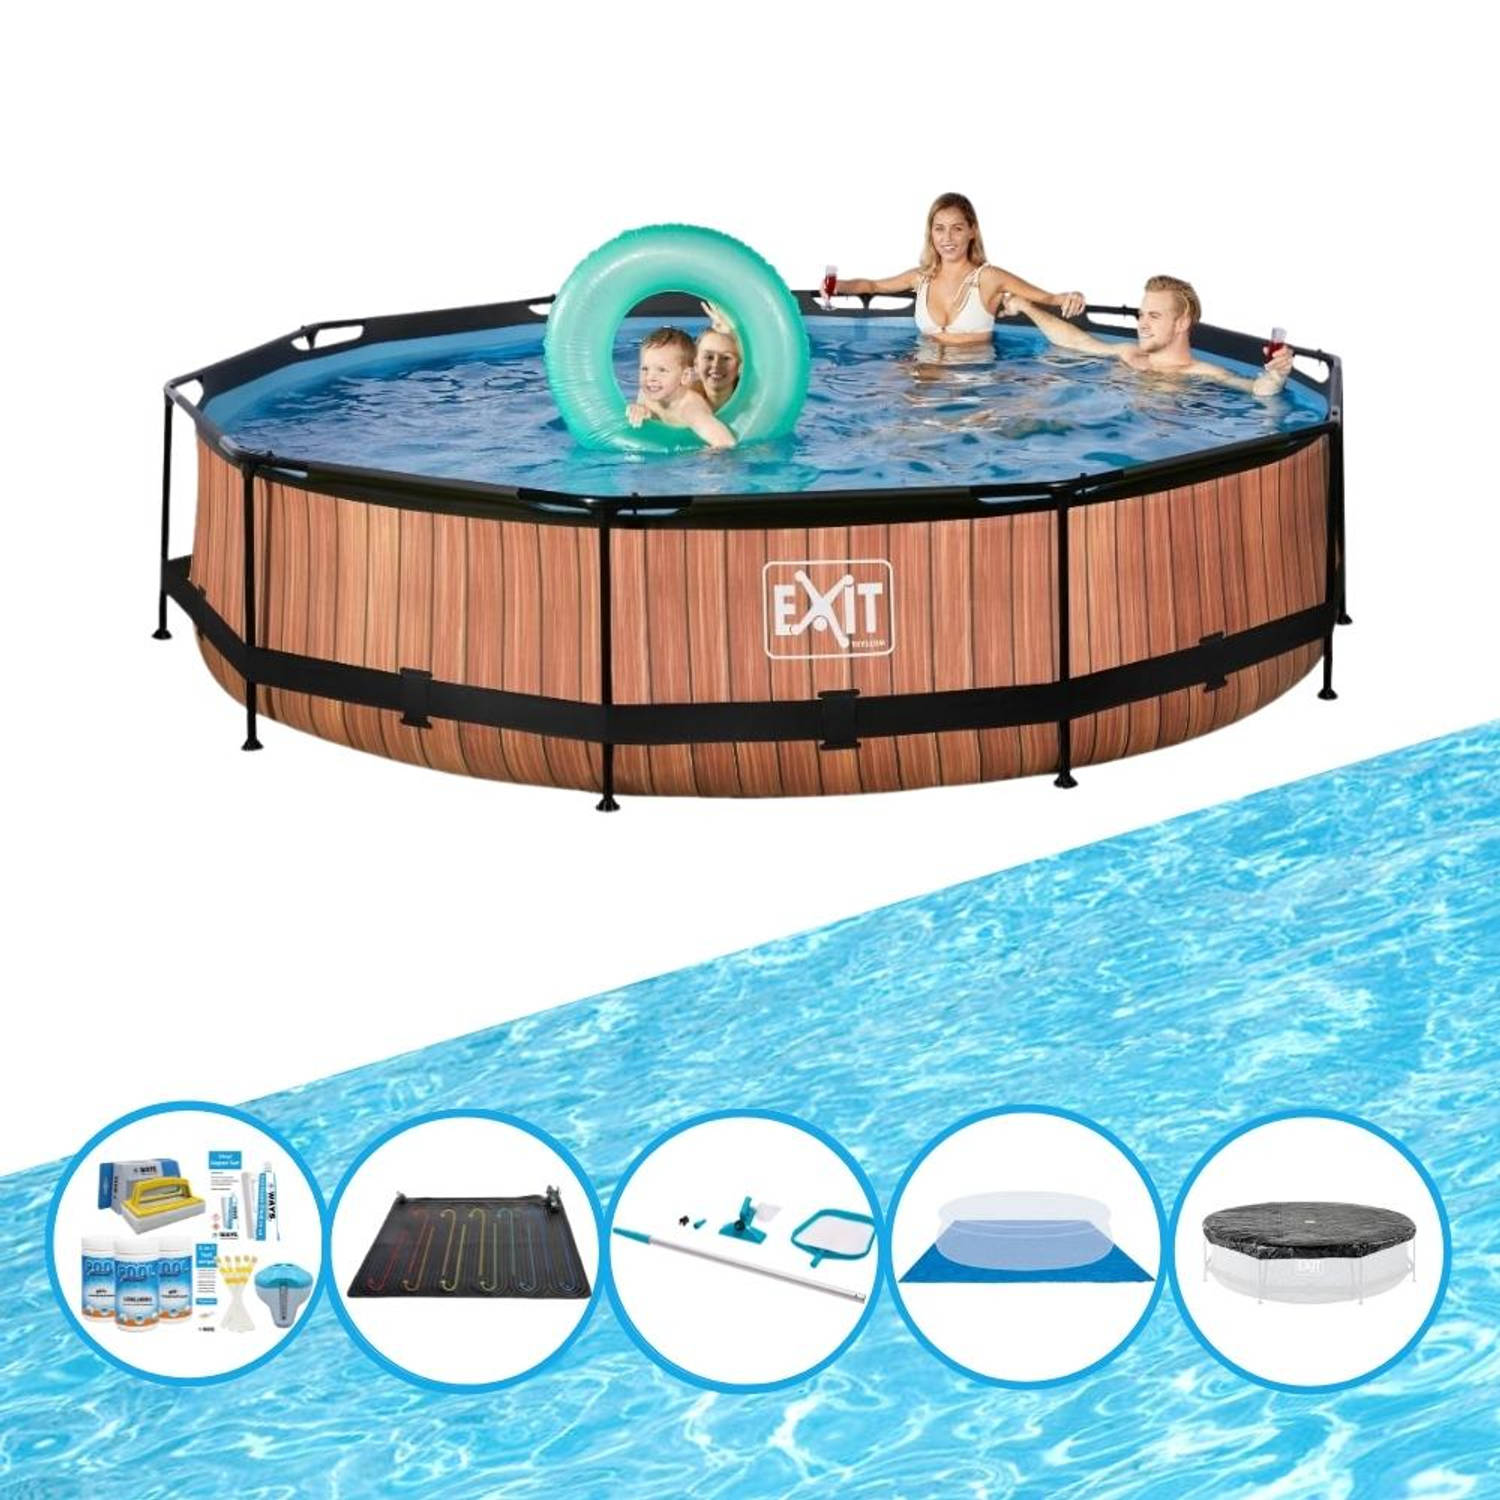 Exit Zwembad Timber Style Frame Pool ø360x76cm Inclusief Accessoires